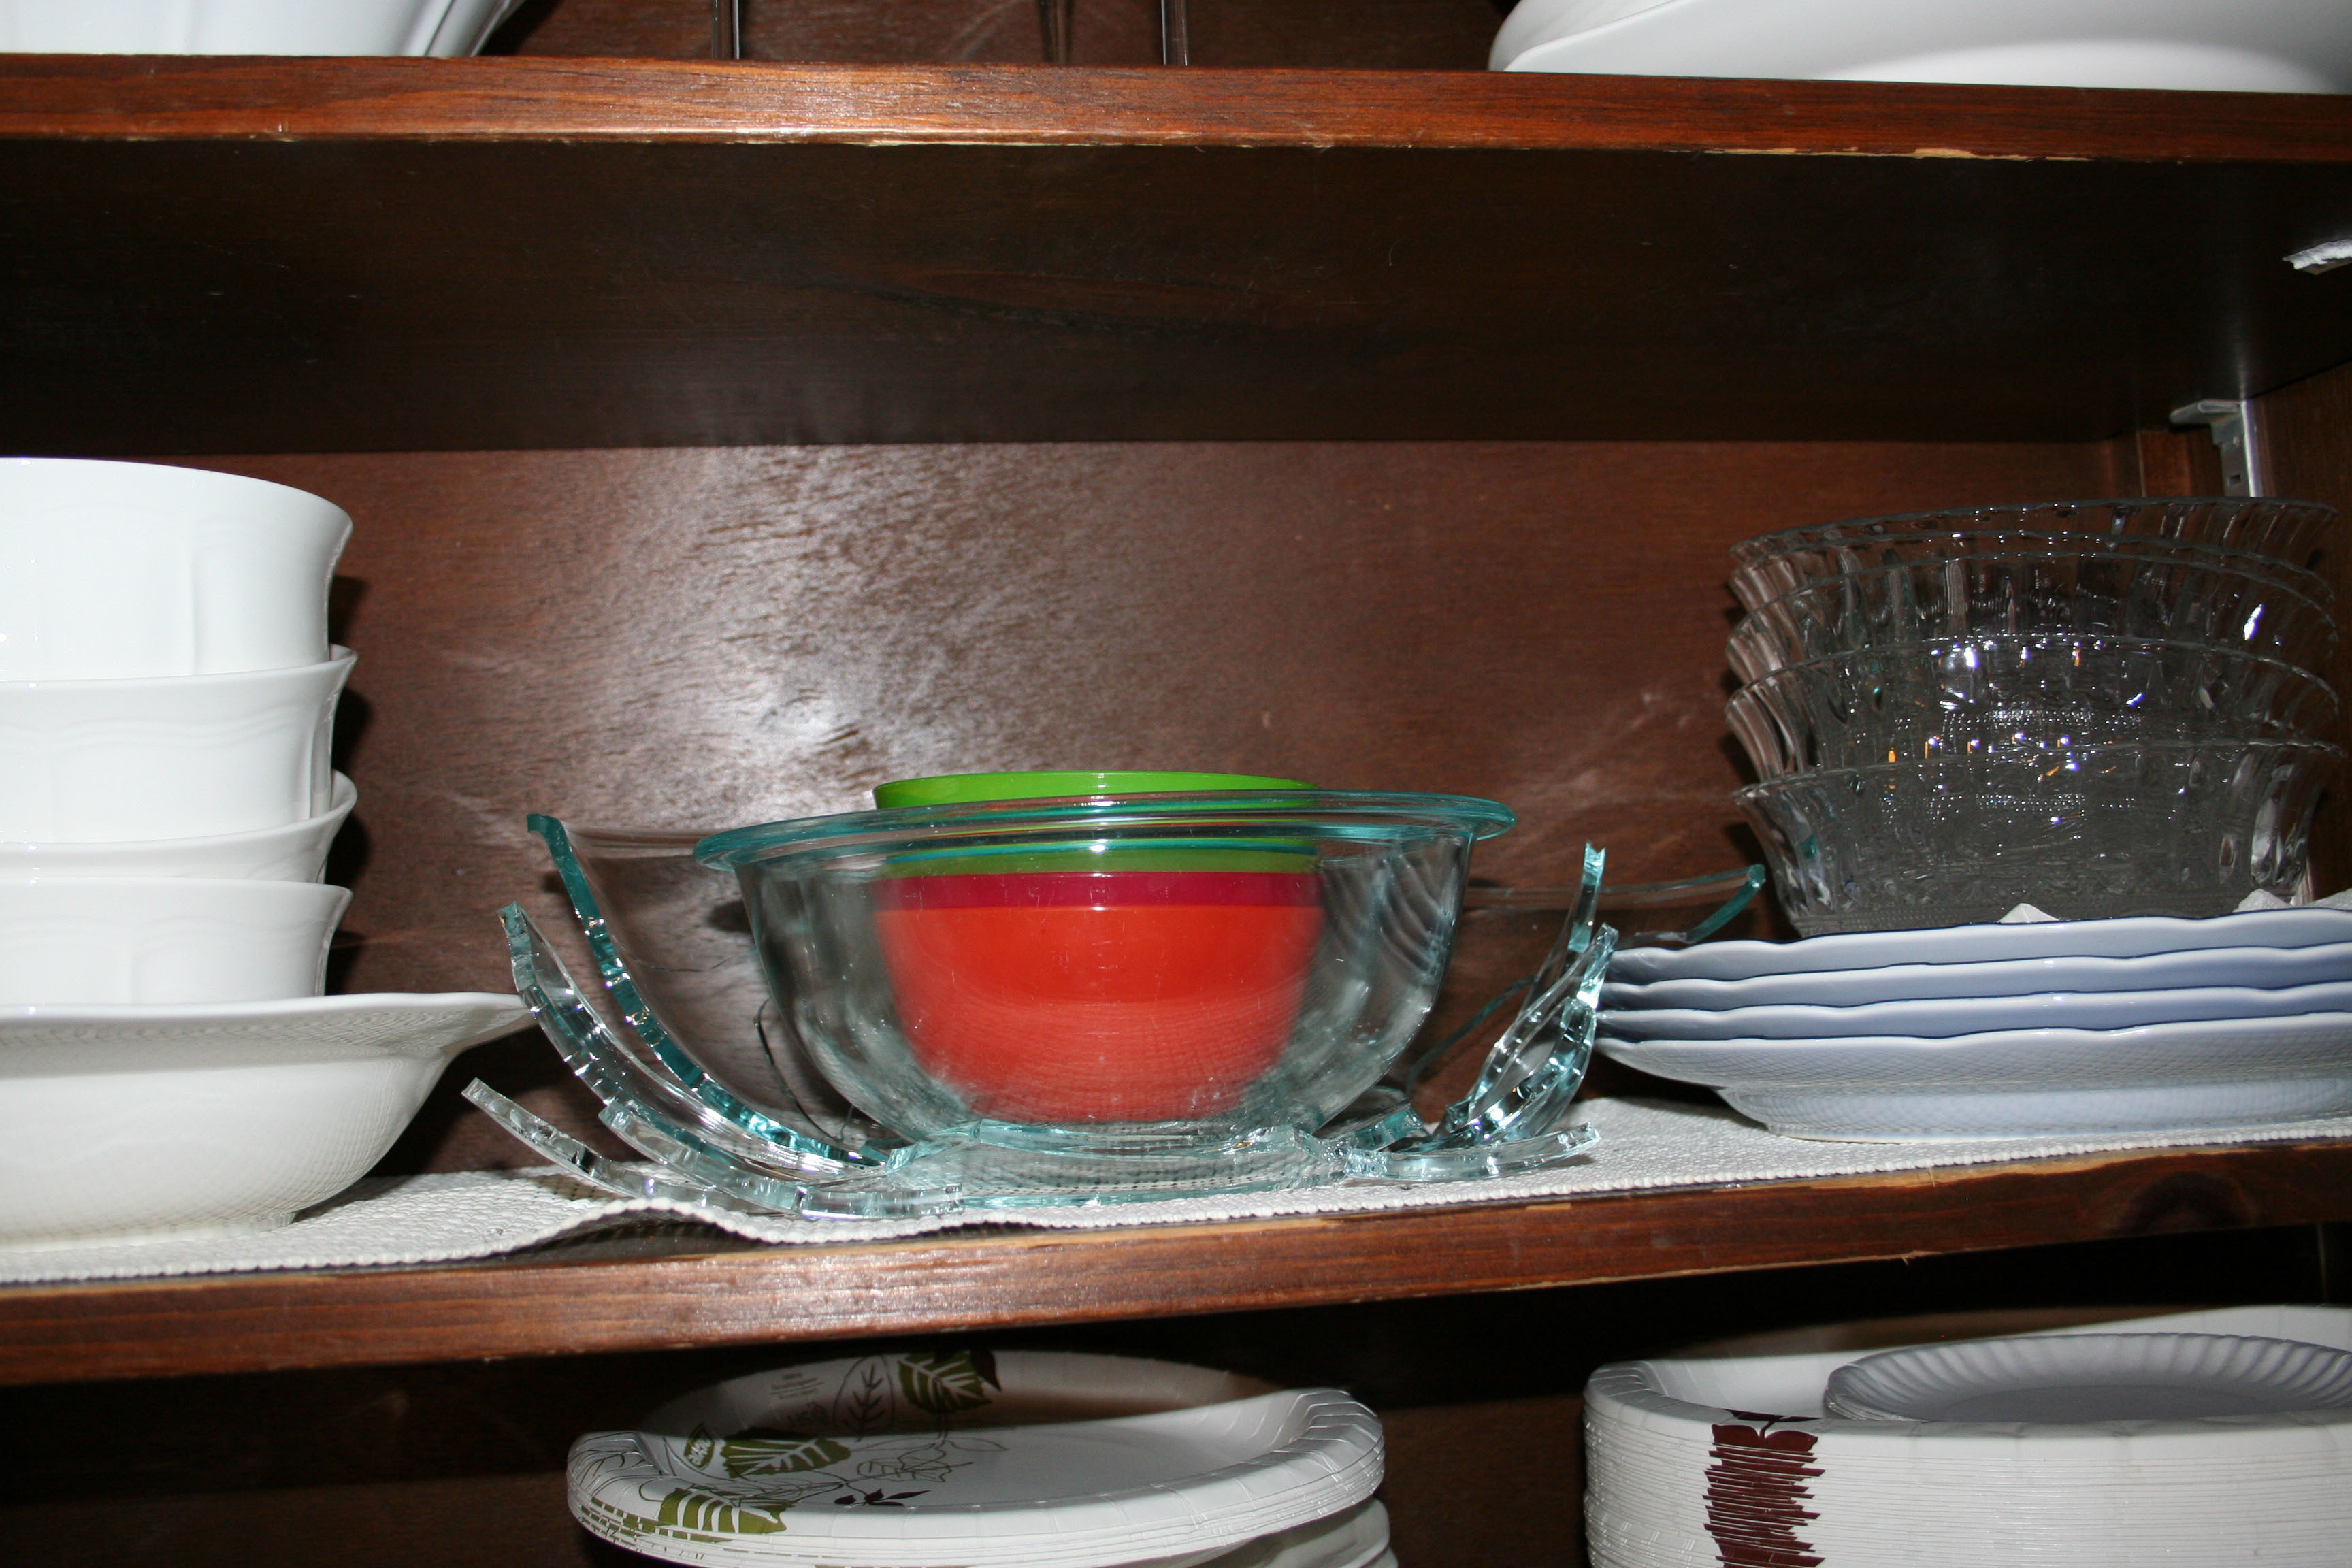 Top 1 568 Complaints And Reviews About Pyrex Cookware